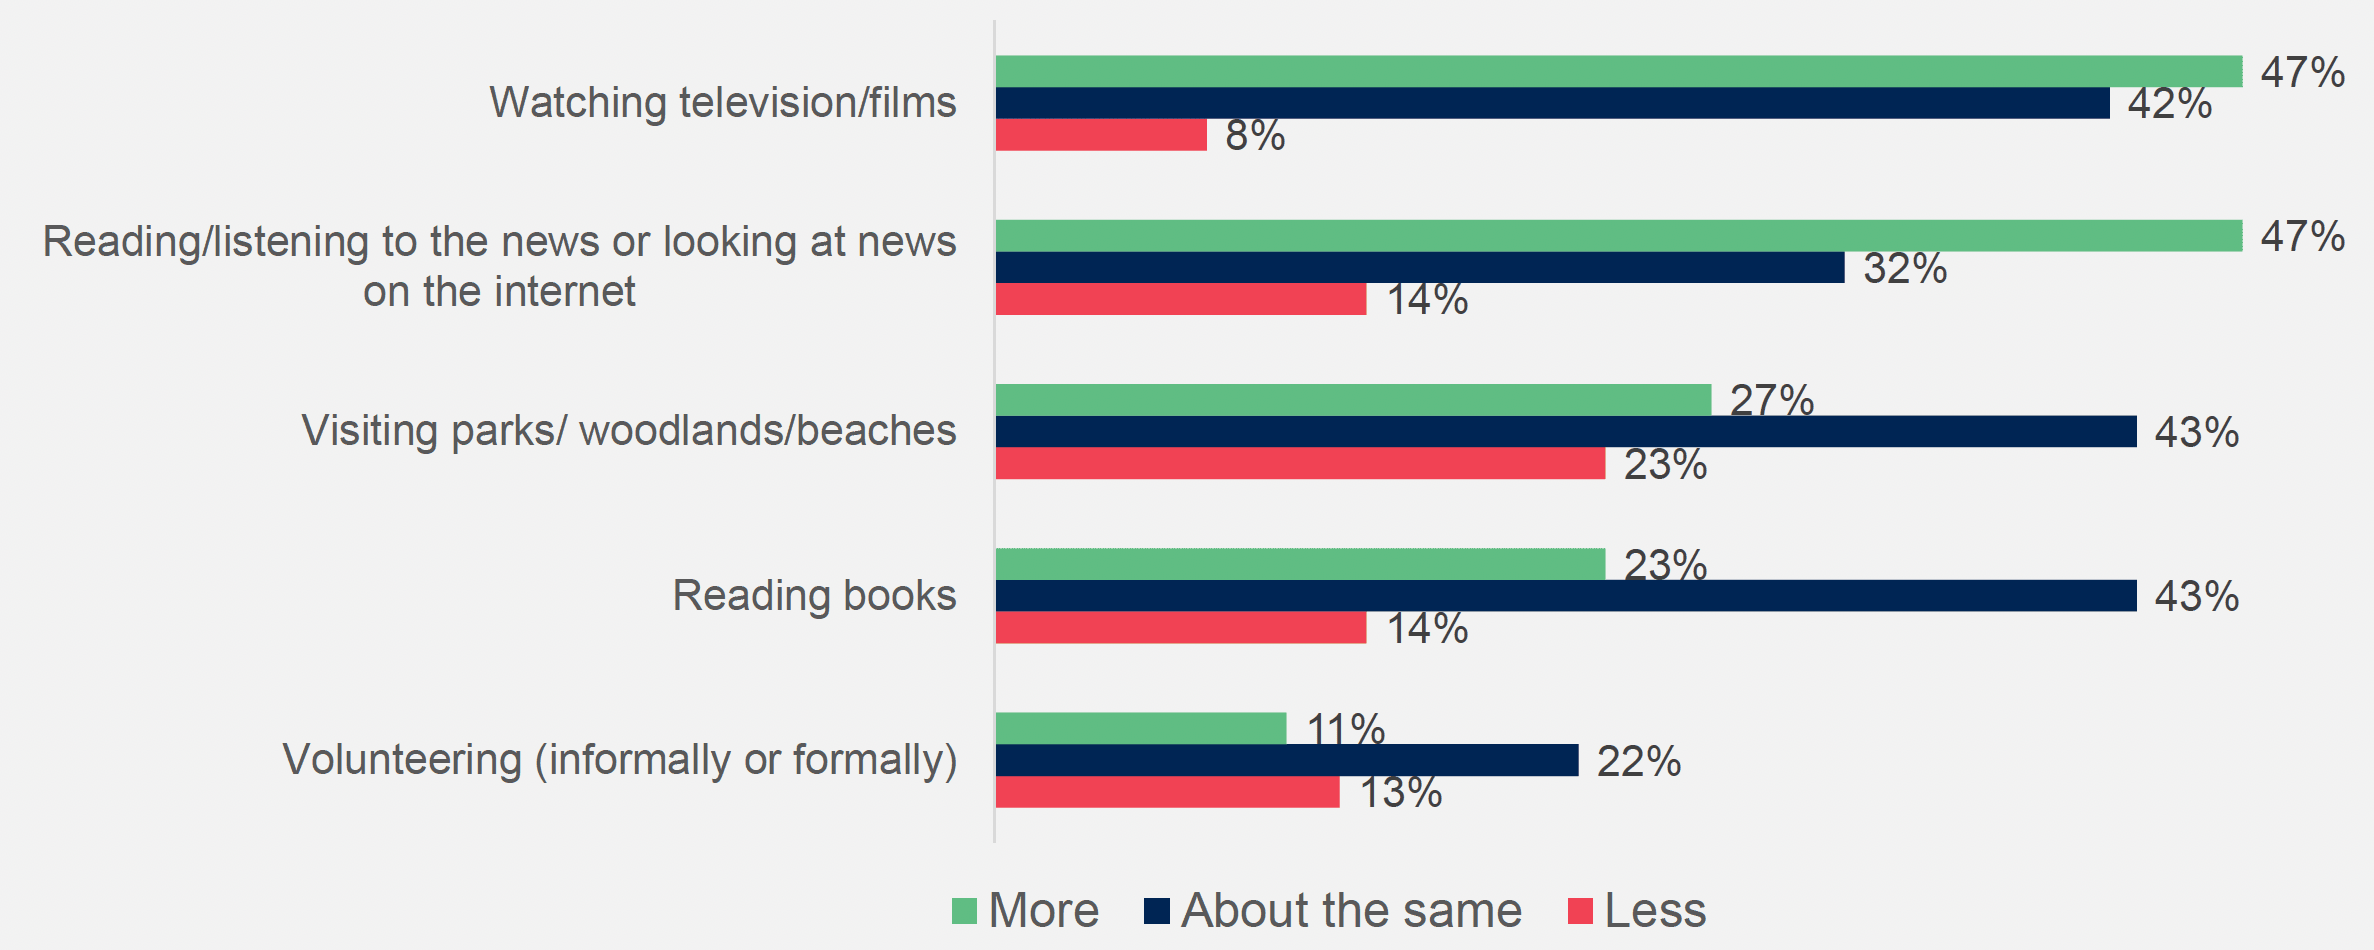 Bar chart showing that 47% are watching television and films more, and 47% are reading/listening to the news or looking at news on the internet more